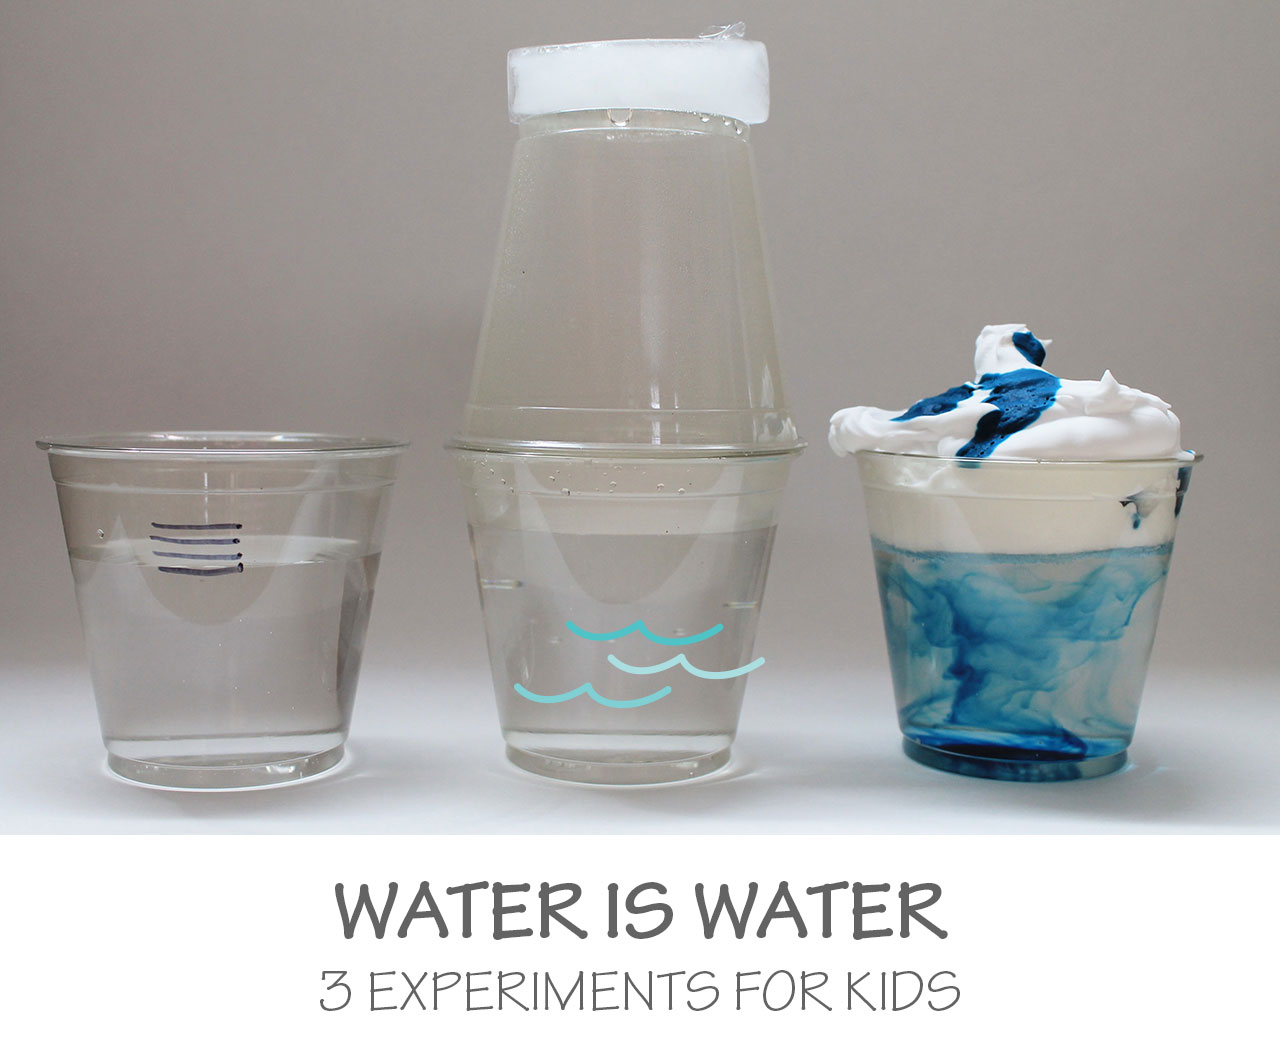 Water is Water: 3 Experiments for Kids